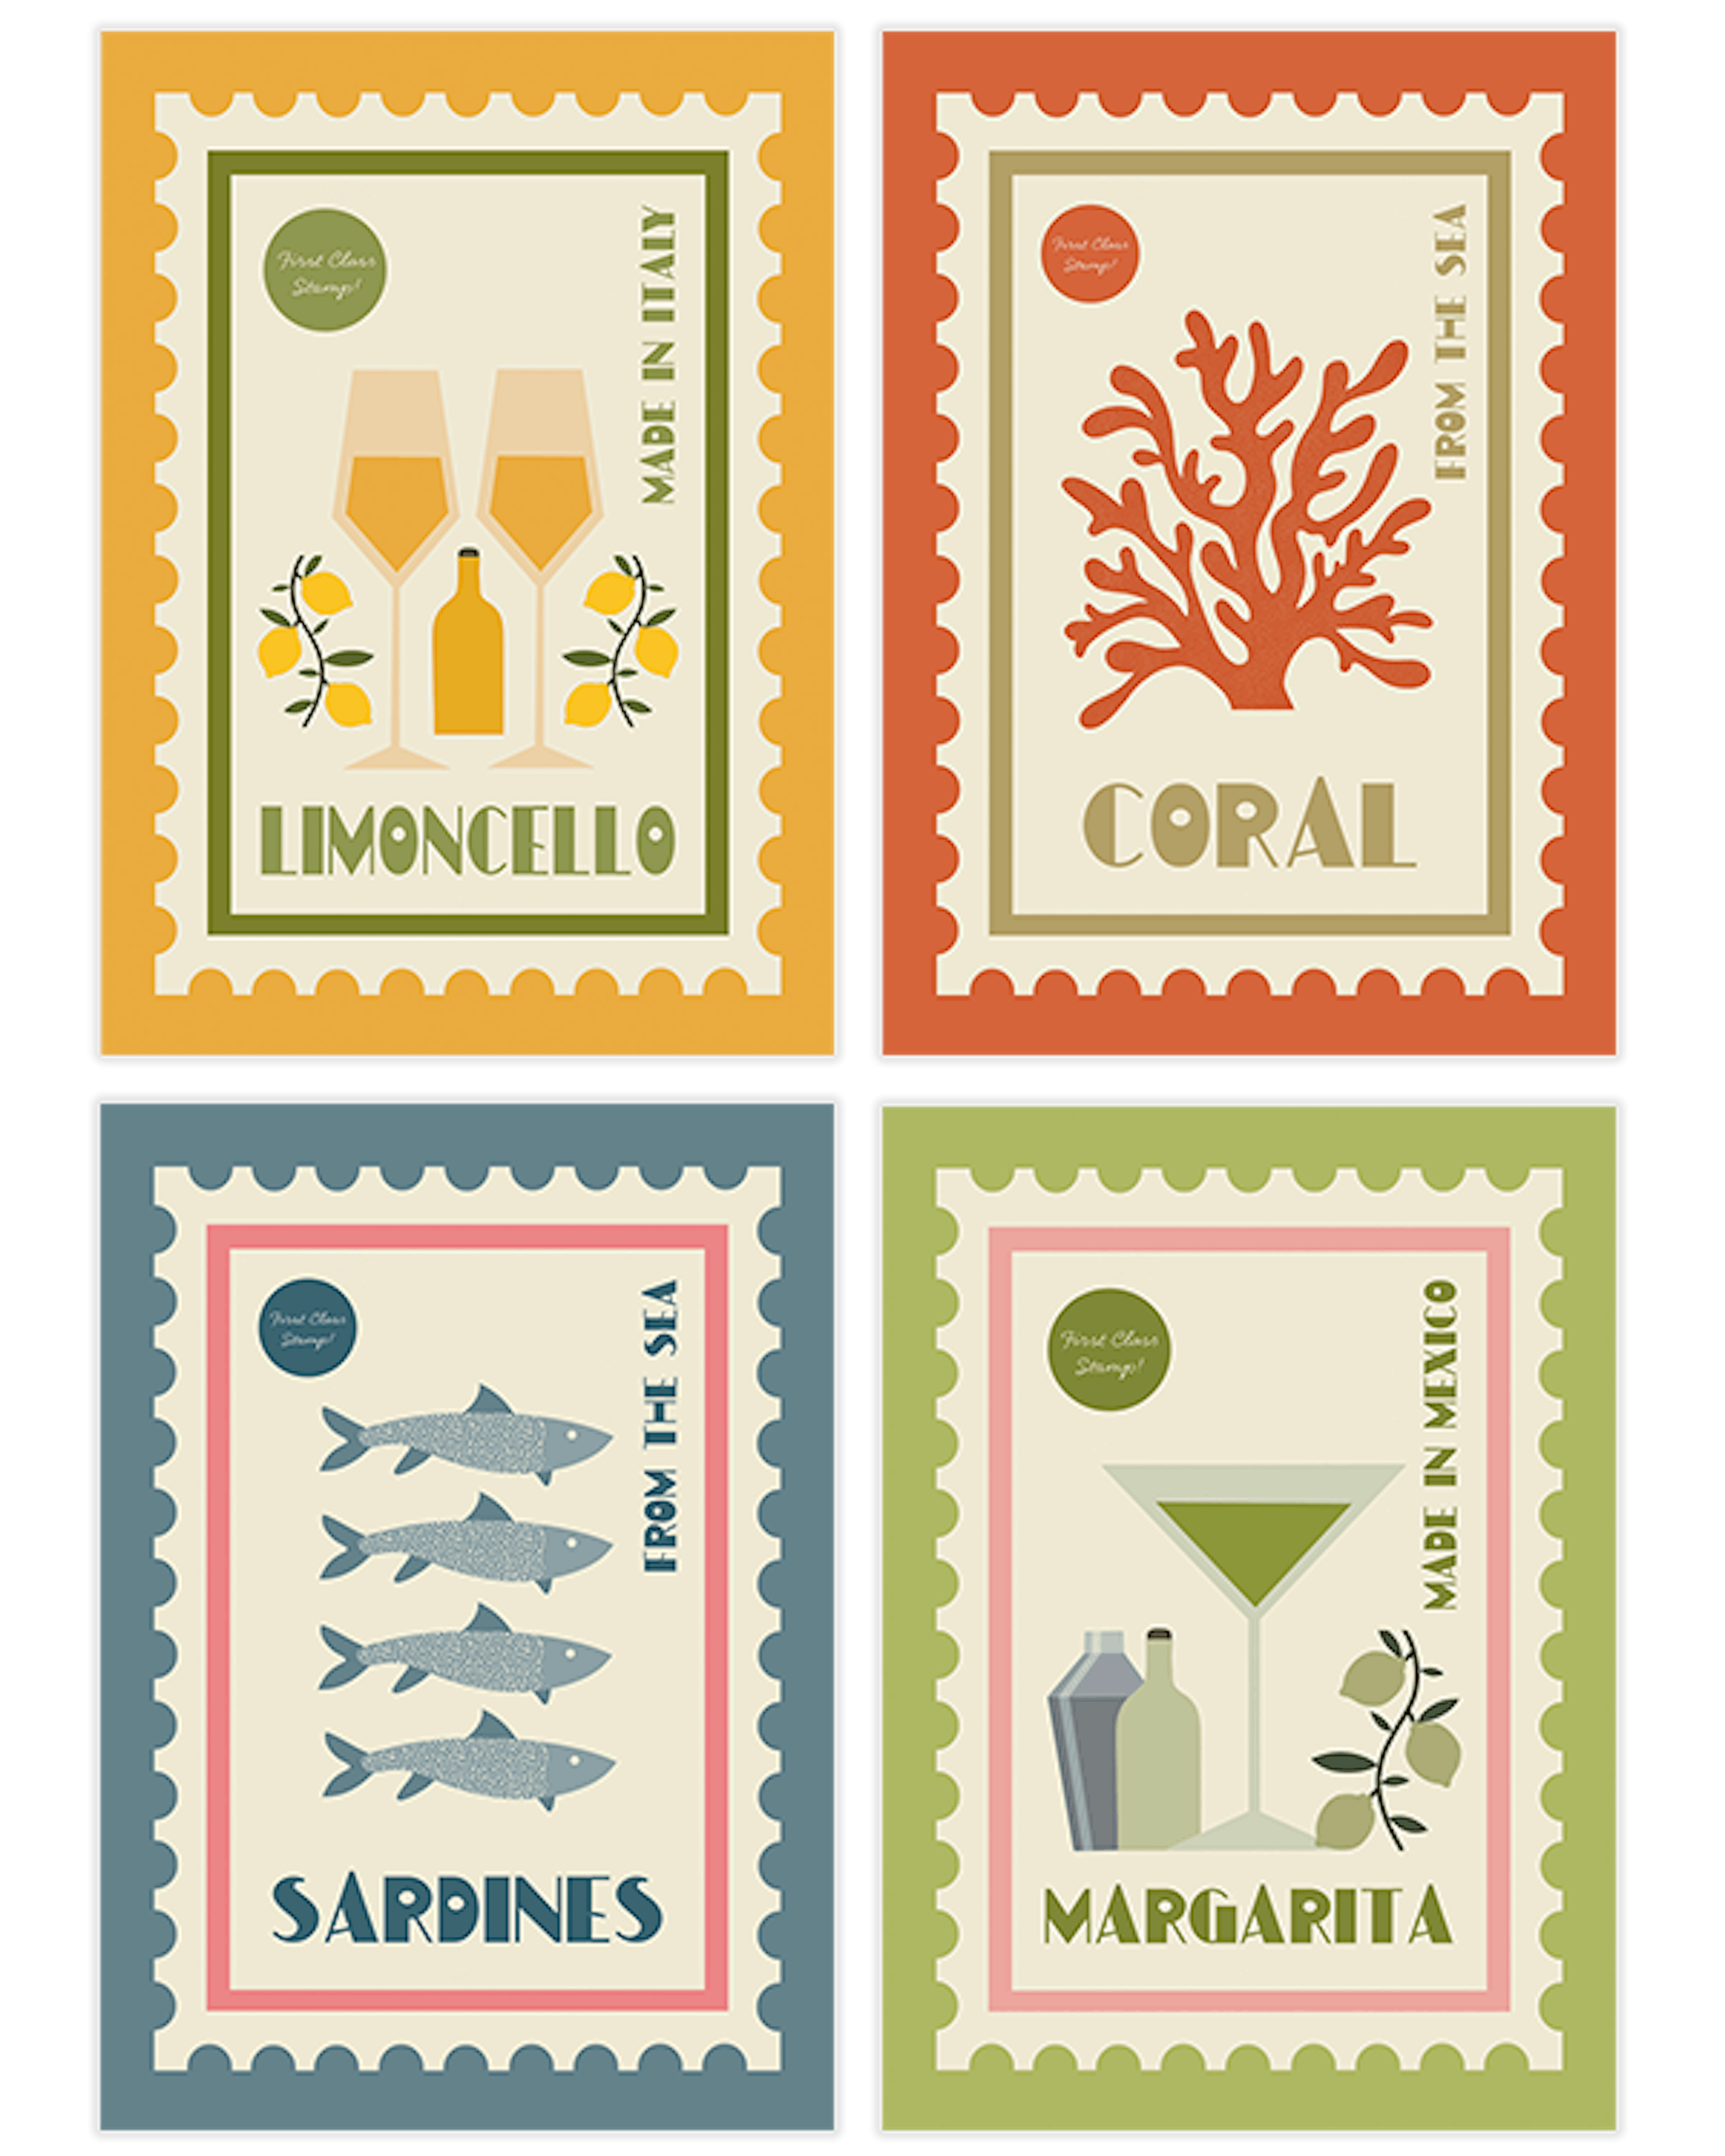 Colorful Stamp Collection Poster pack